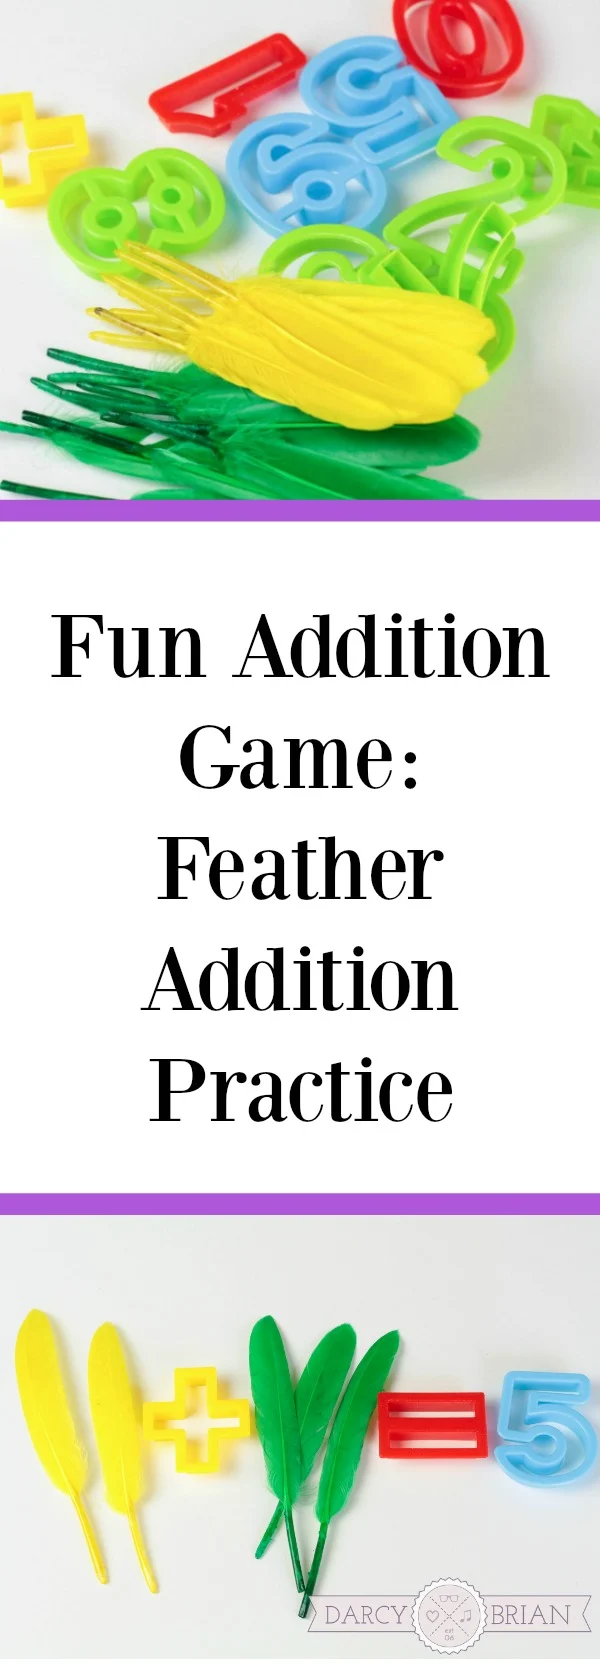 Looking for fall or Thanksgiving themed math activities for kids? This Fun Feather Addition Game is a great way to combine the season and learning! Check out our tips for how to use common items to teach your children! #math #kidsactivities #homeschool #addition